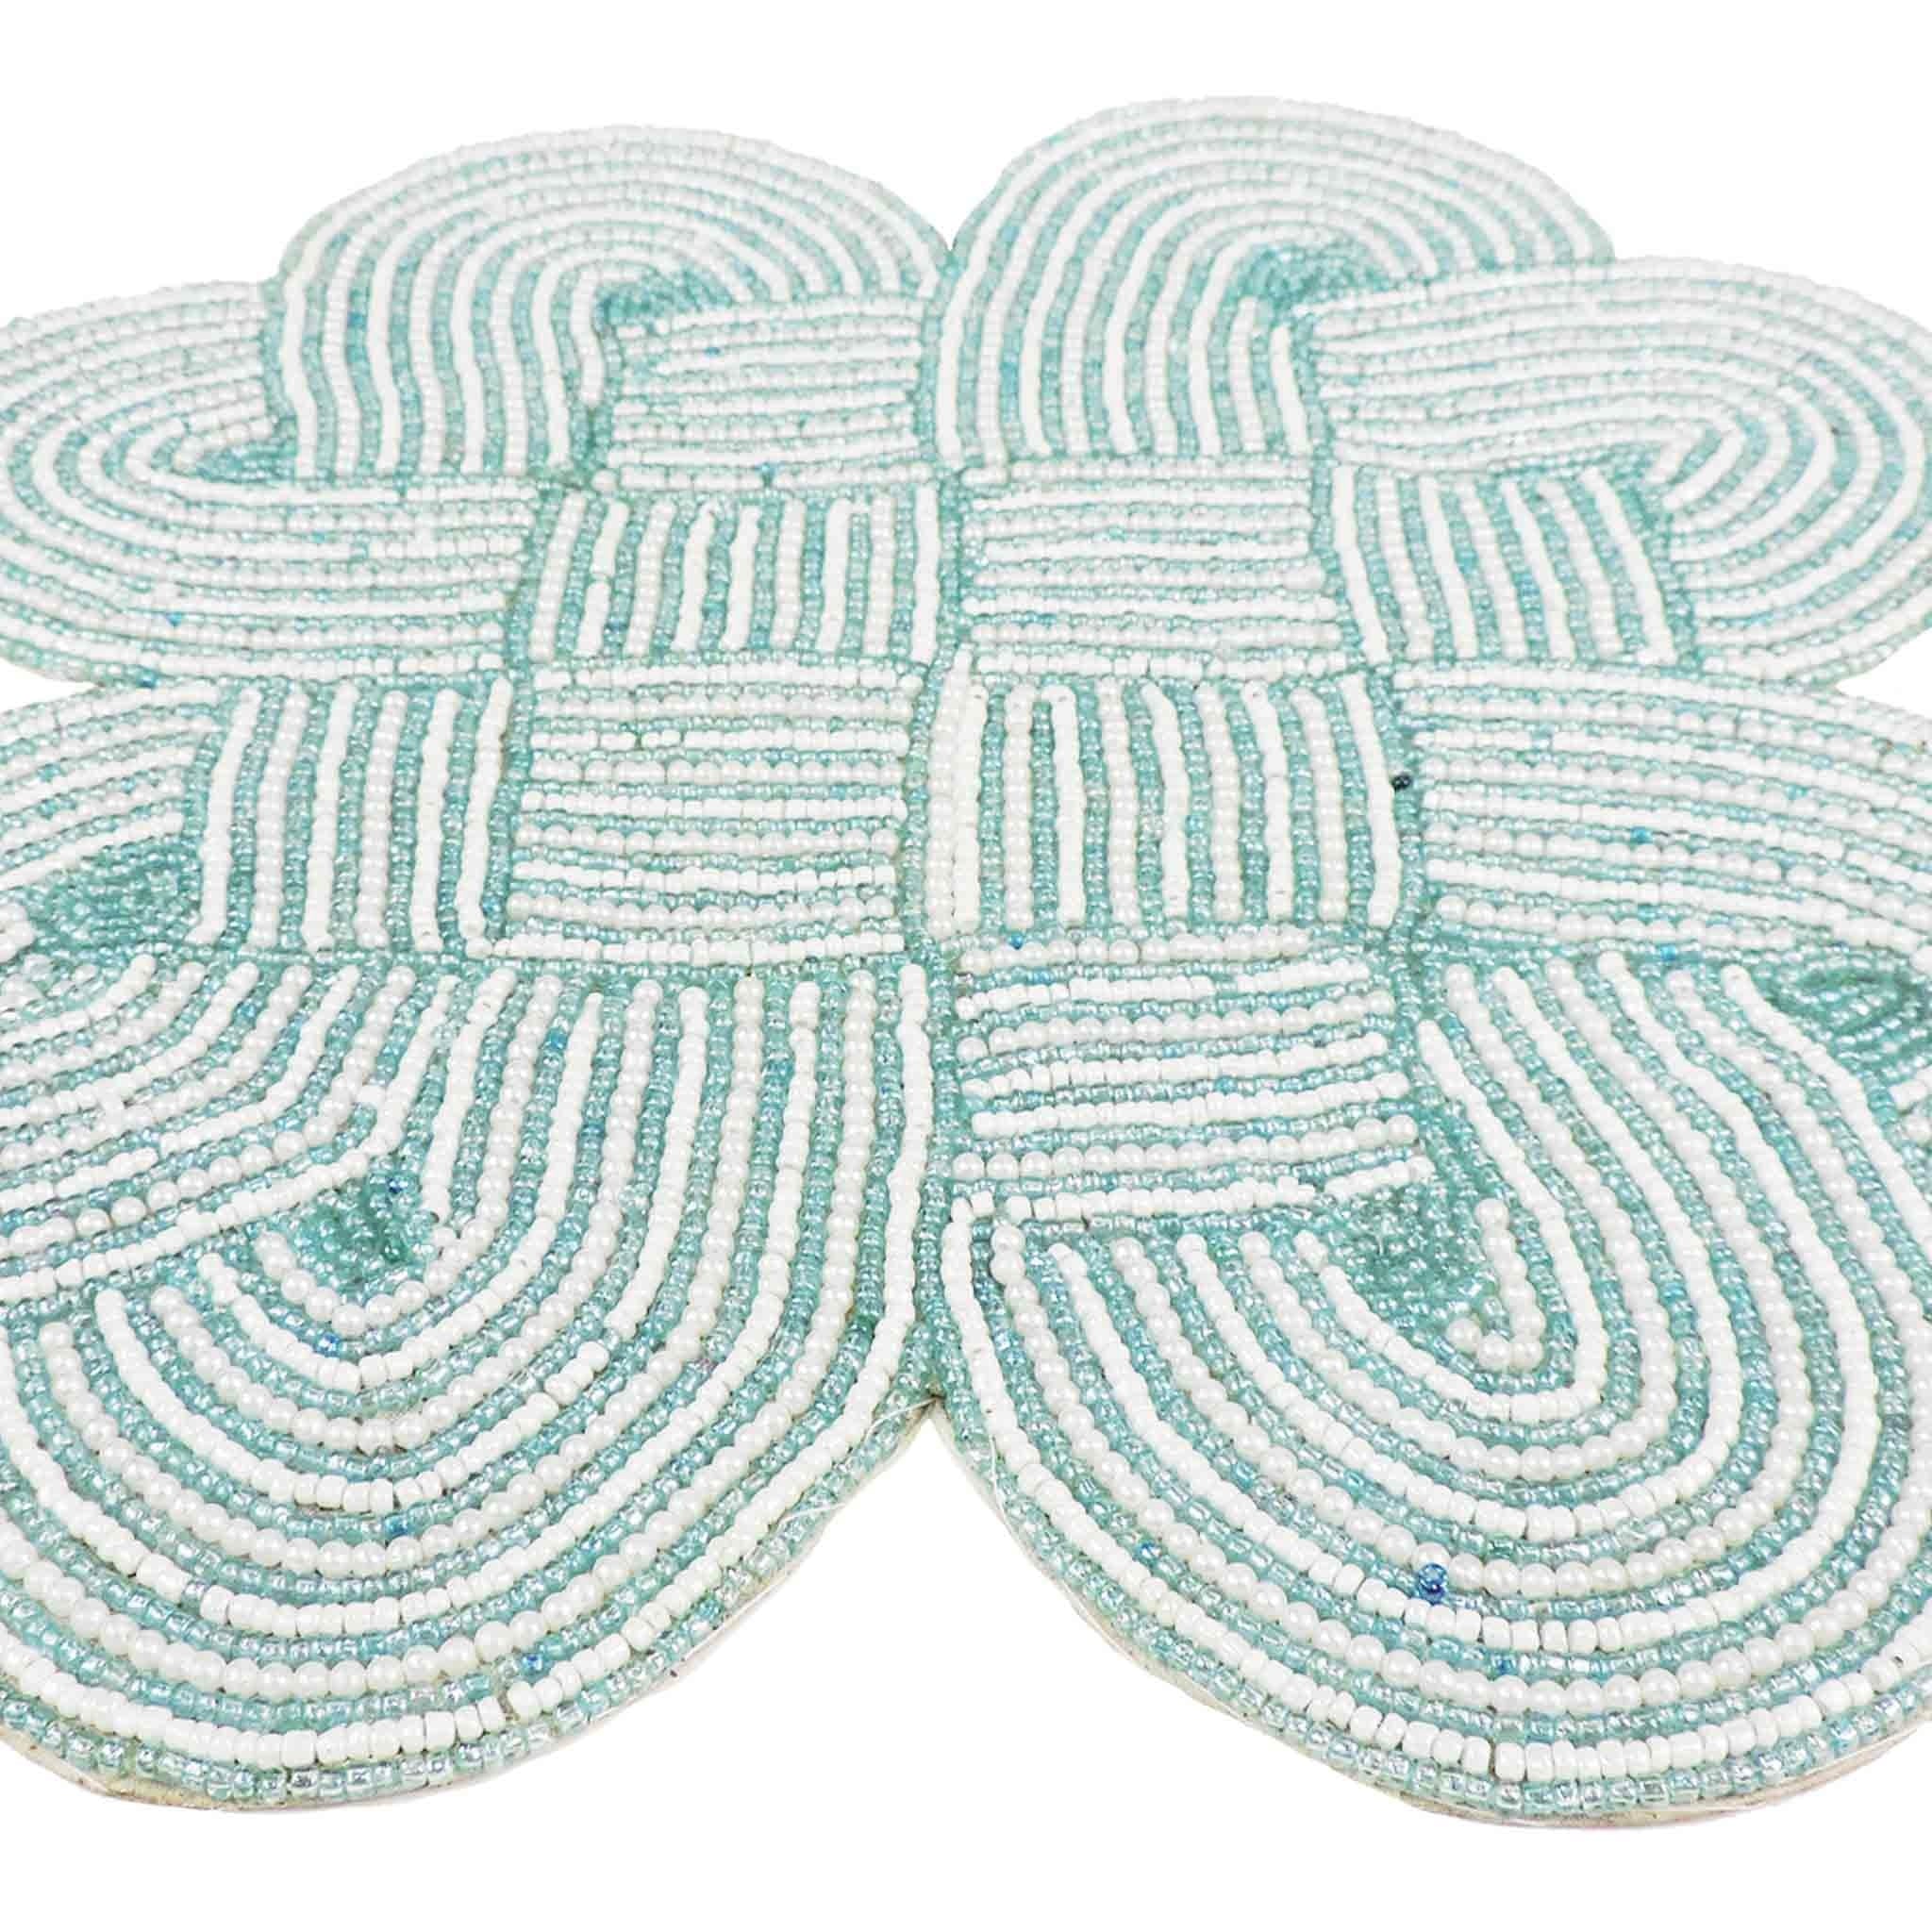 Celtic Knot Bead Embroidered Placemat in Light Teal & Cream, Set of 2/4